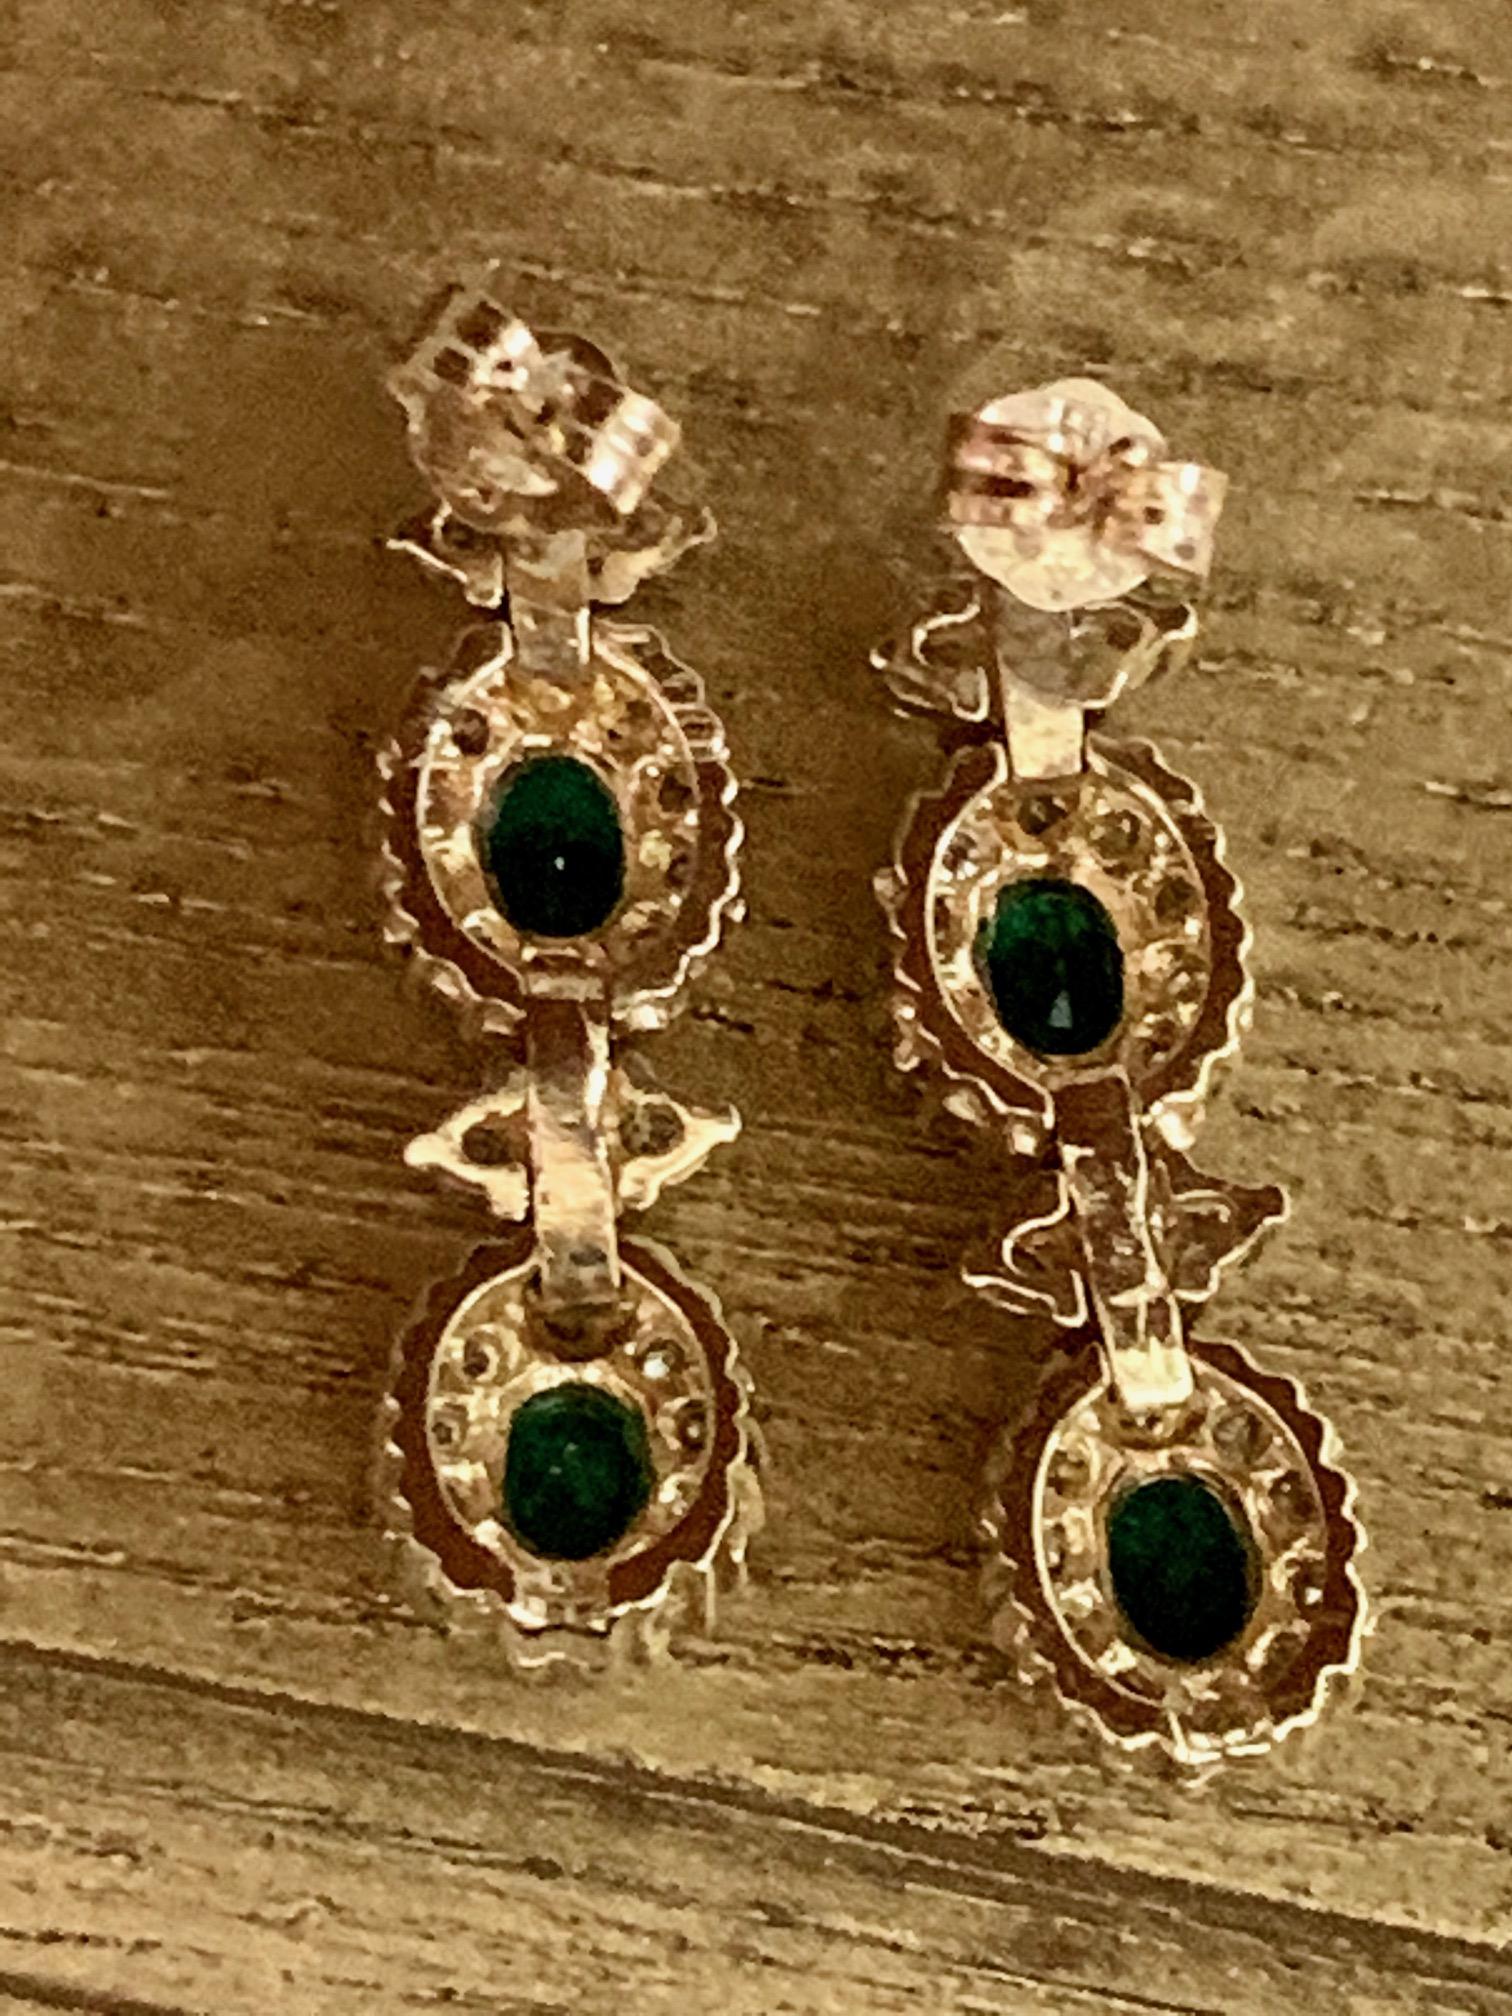 These modern dangle earrings feature four - 5 x 4mm oval green Emeralds. The total estimated weight is 1.60 carats.  There are also 56 2mm brilliant cut Diamonds with a total estimated weight of 1.95 carats.  The average grade is SI(2)-H. 

The